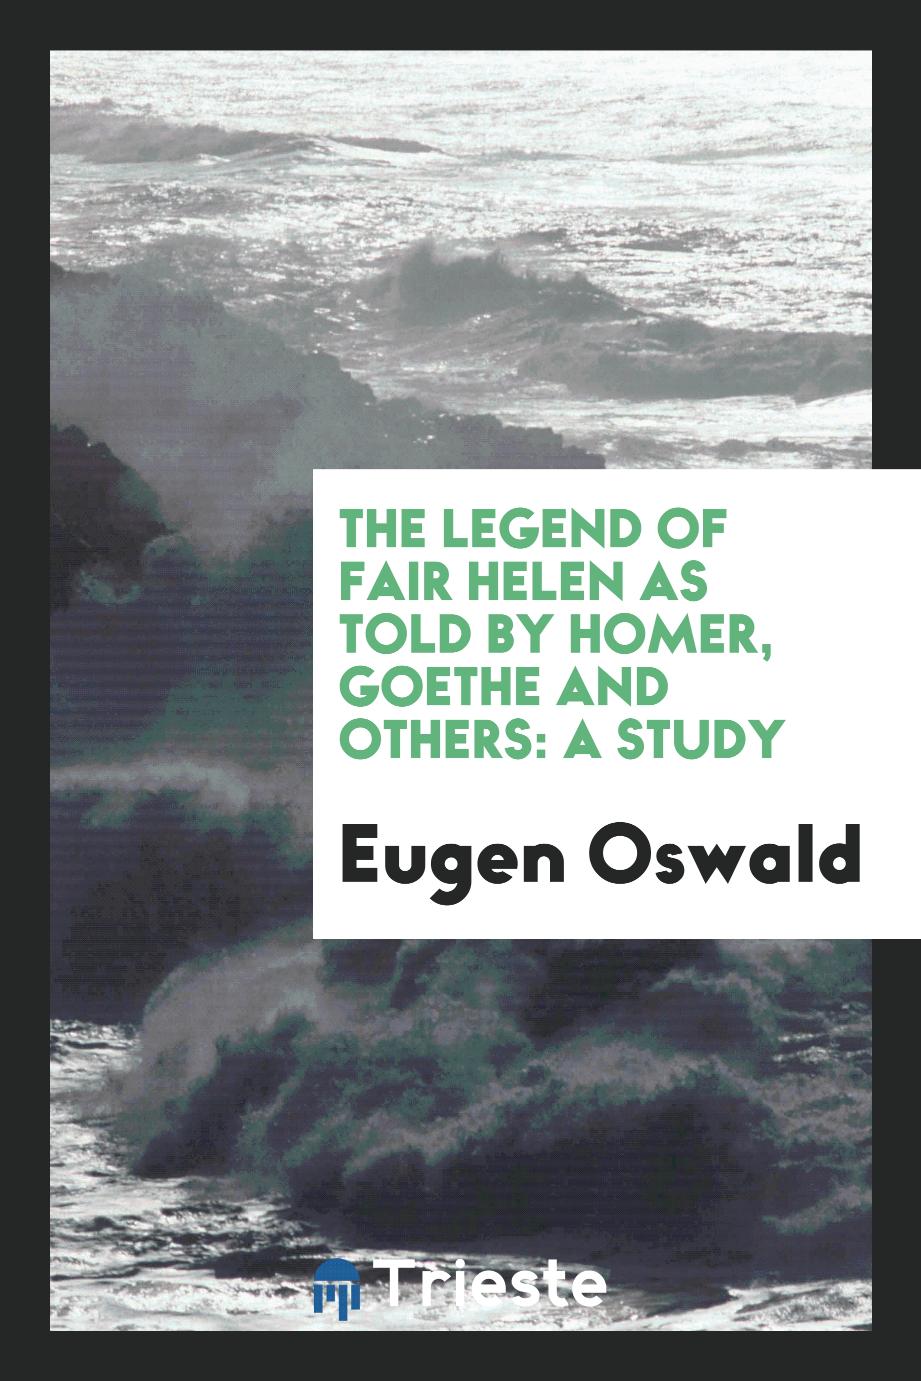 The legend of fair Helen as told by Homer, Goethe and others: a study